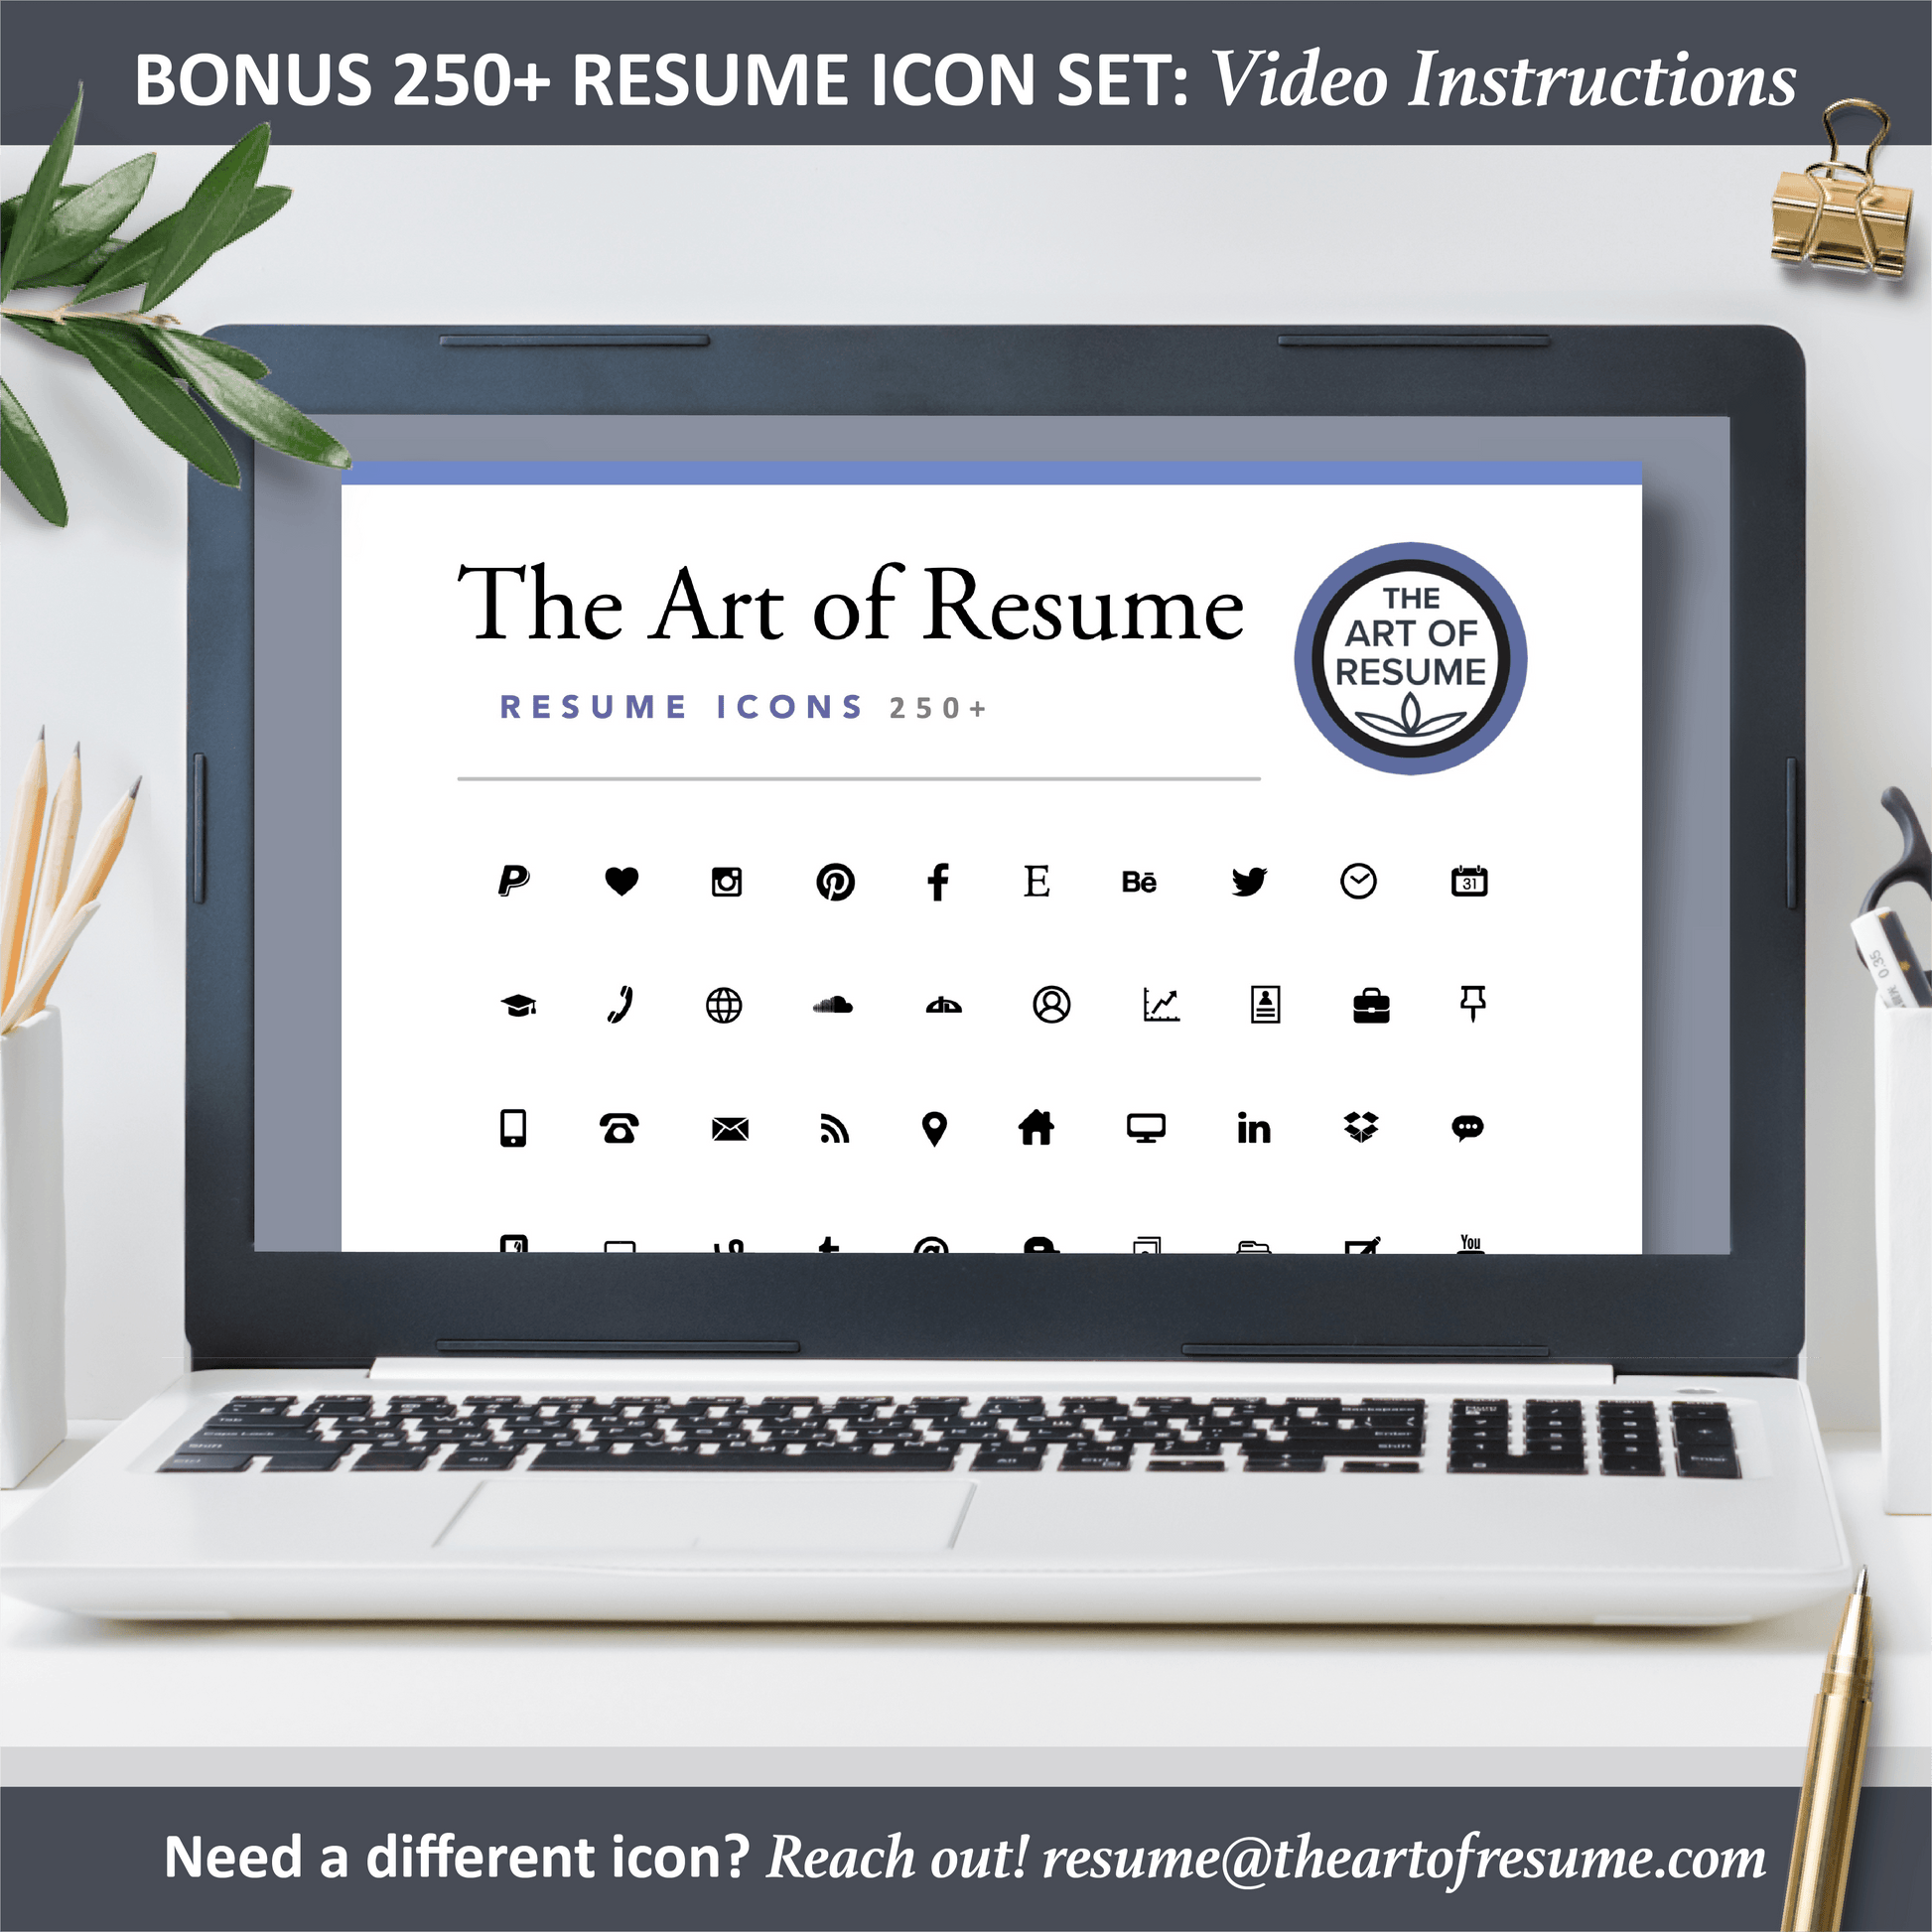 Resume Templates & Cover Letter Bundle (Includes FREE: The Art of Resume Writing Guide) - The Art of Resume